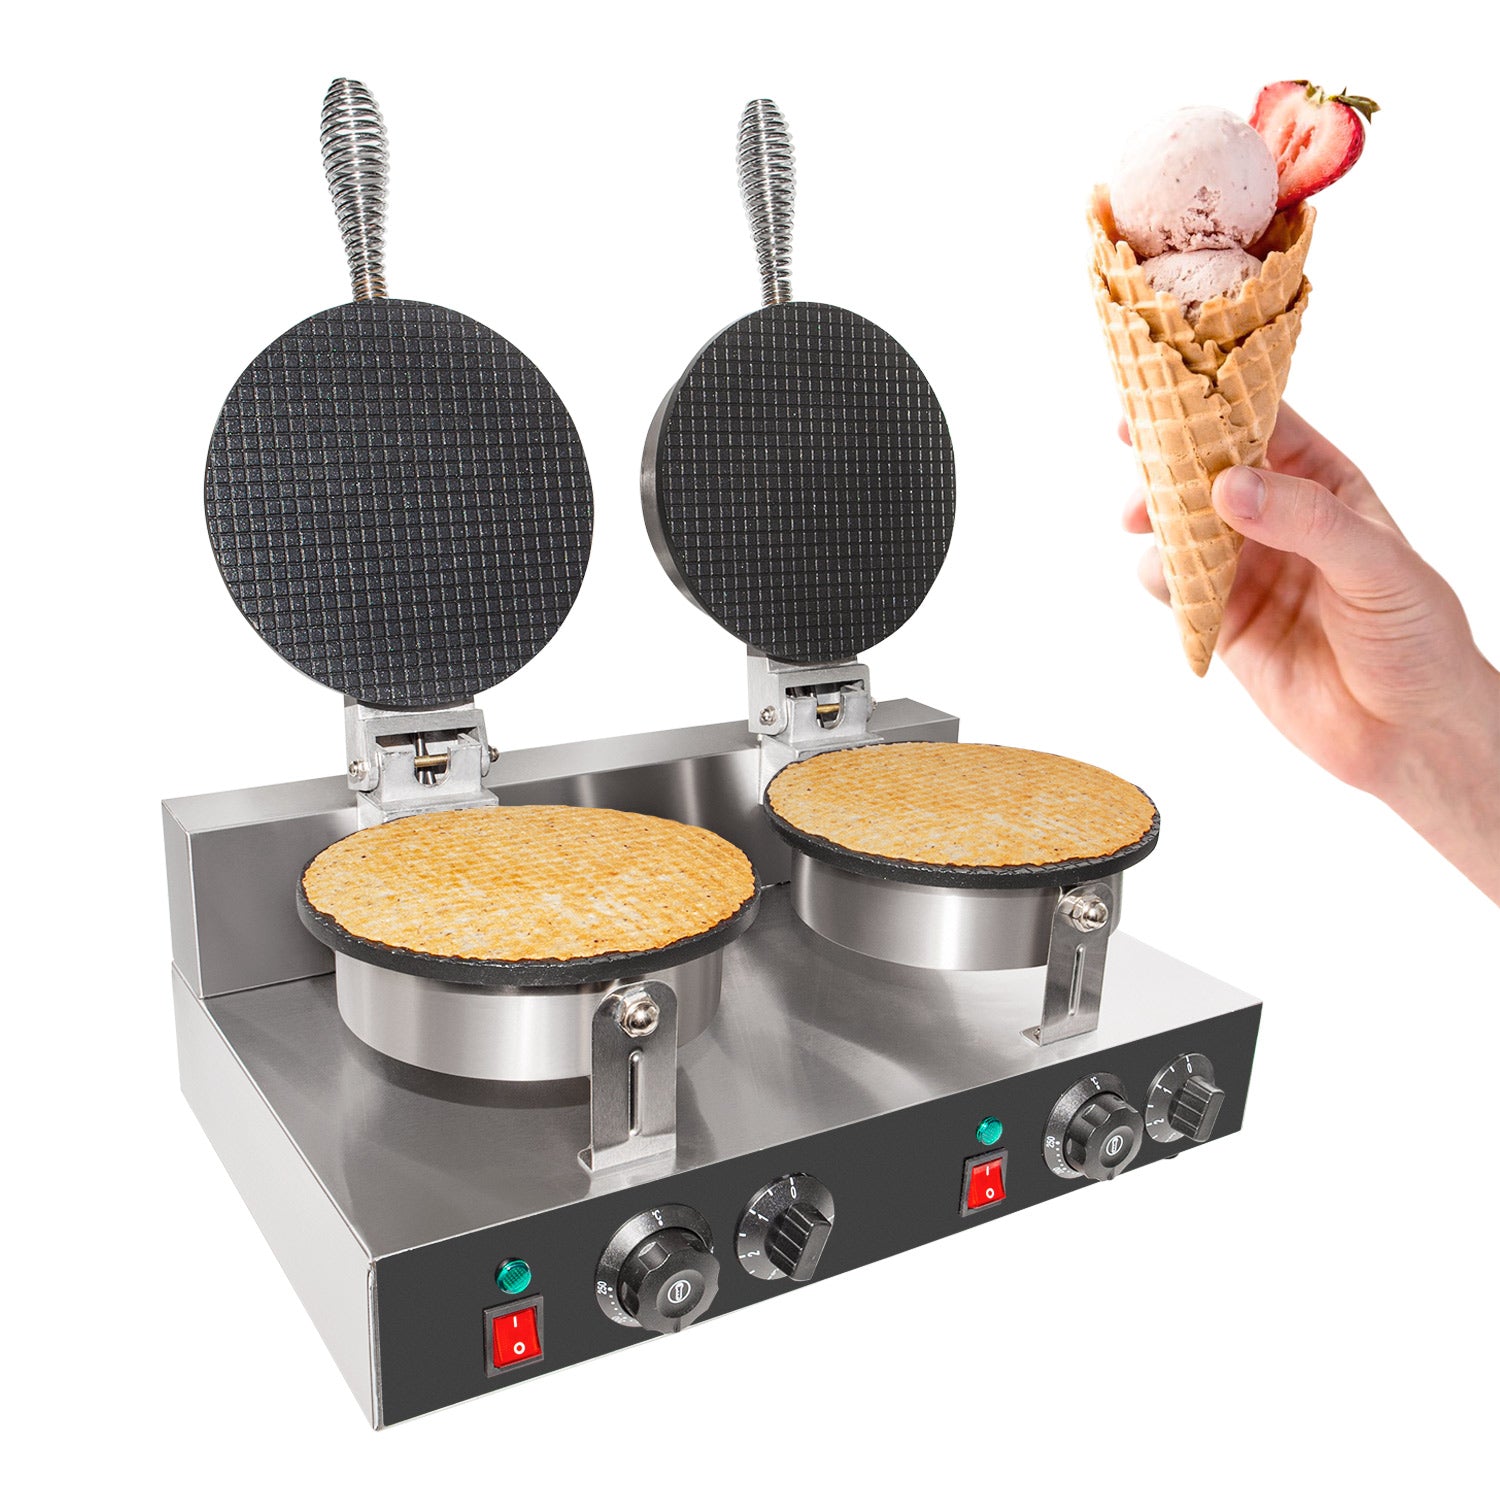 GR-XCXG2 Waffle Cone Maker | Commercial Double Ice Cream Waffle Cone Maker  | Stainless Steel | Nonstick Coating